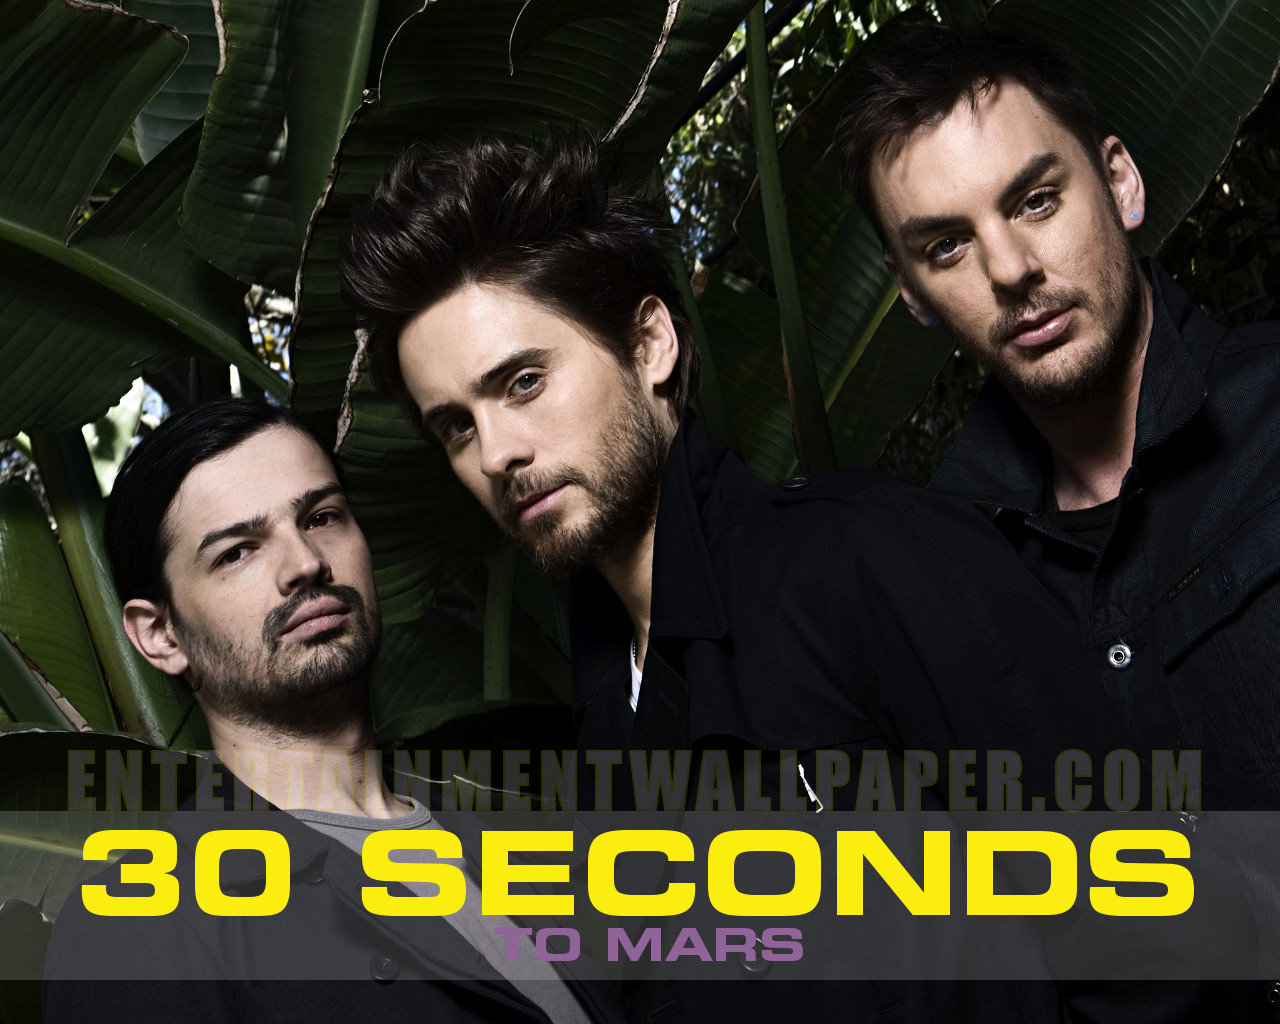 30 seconds to mars wallpaper,movie,poster,font,photo caption